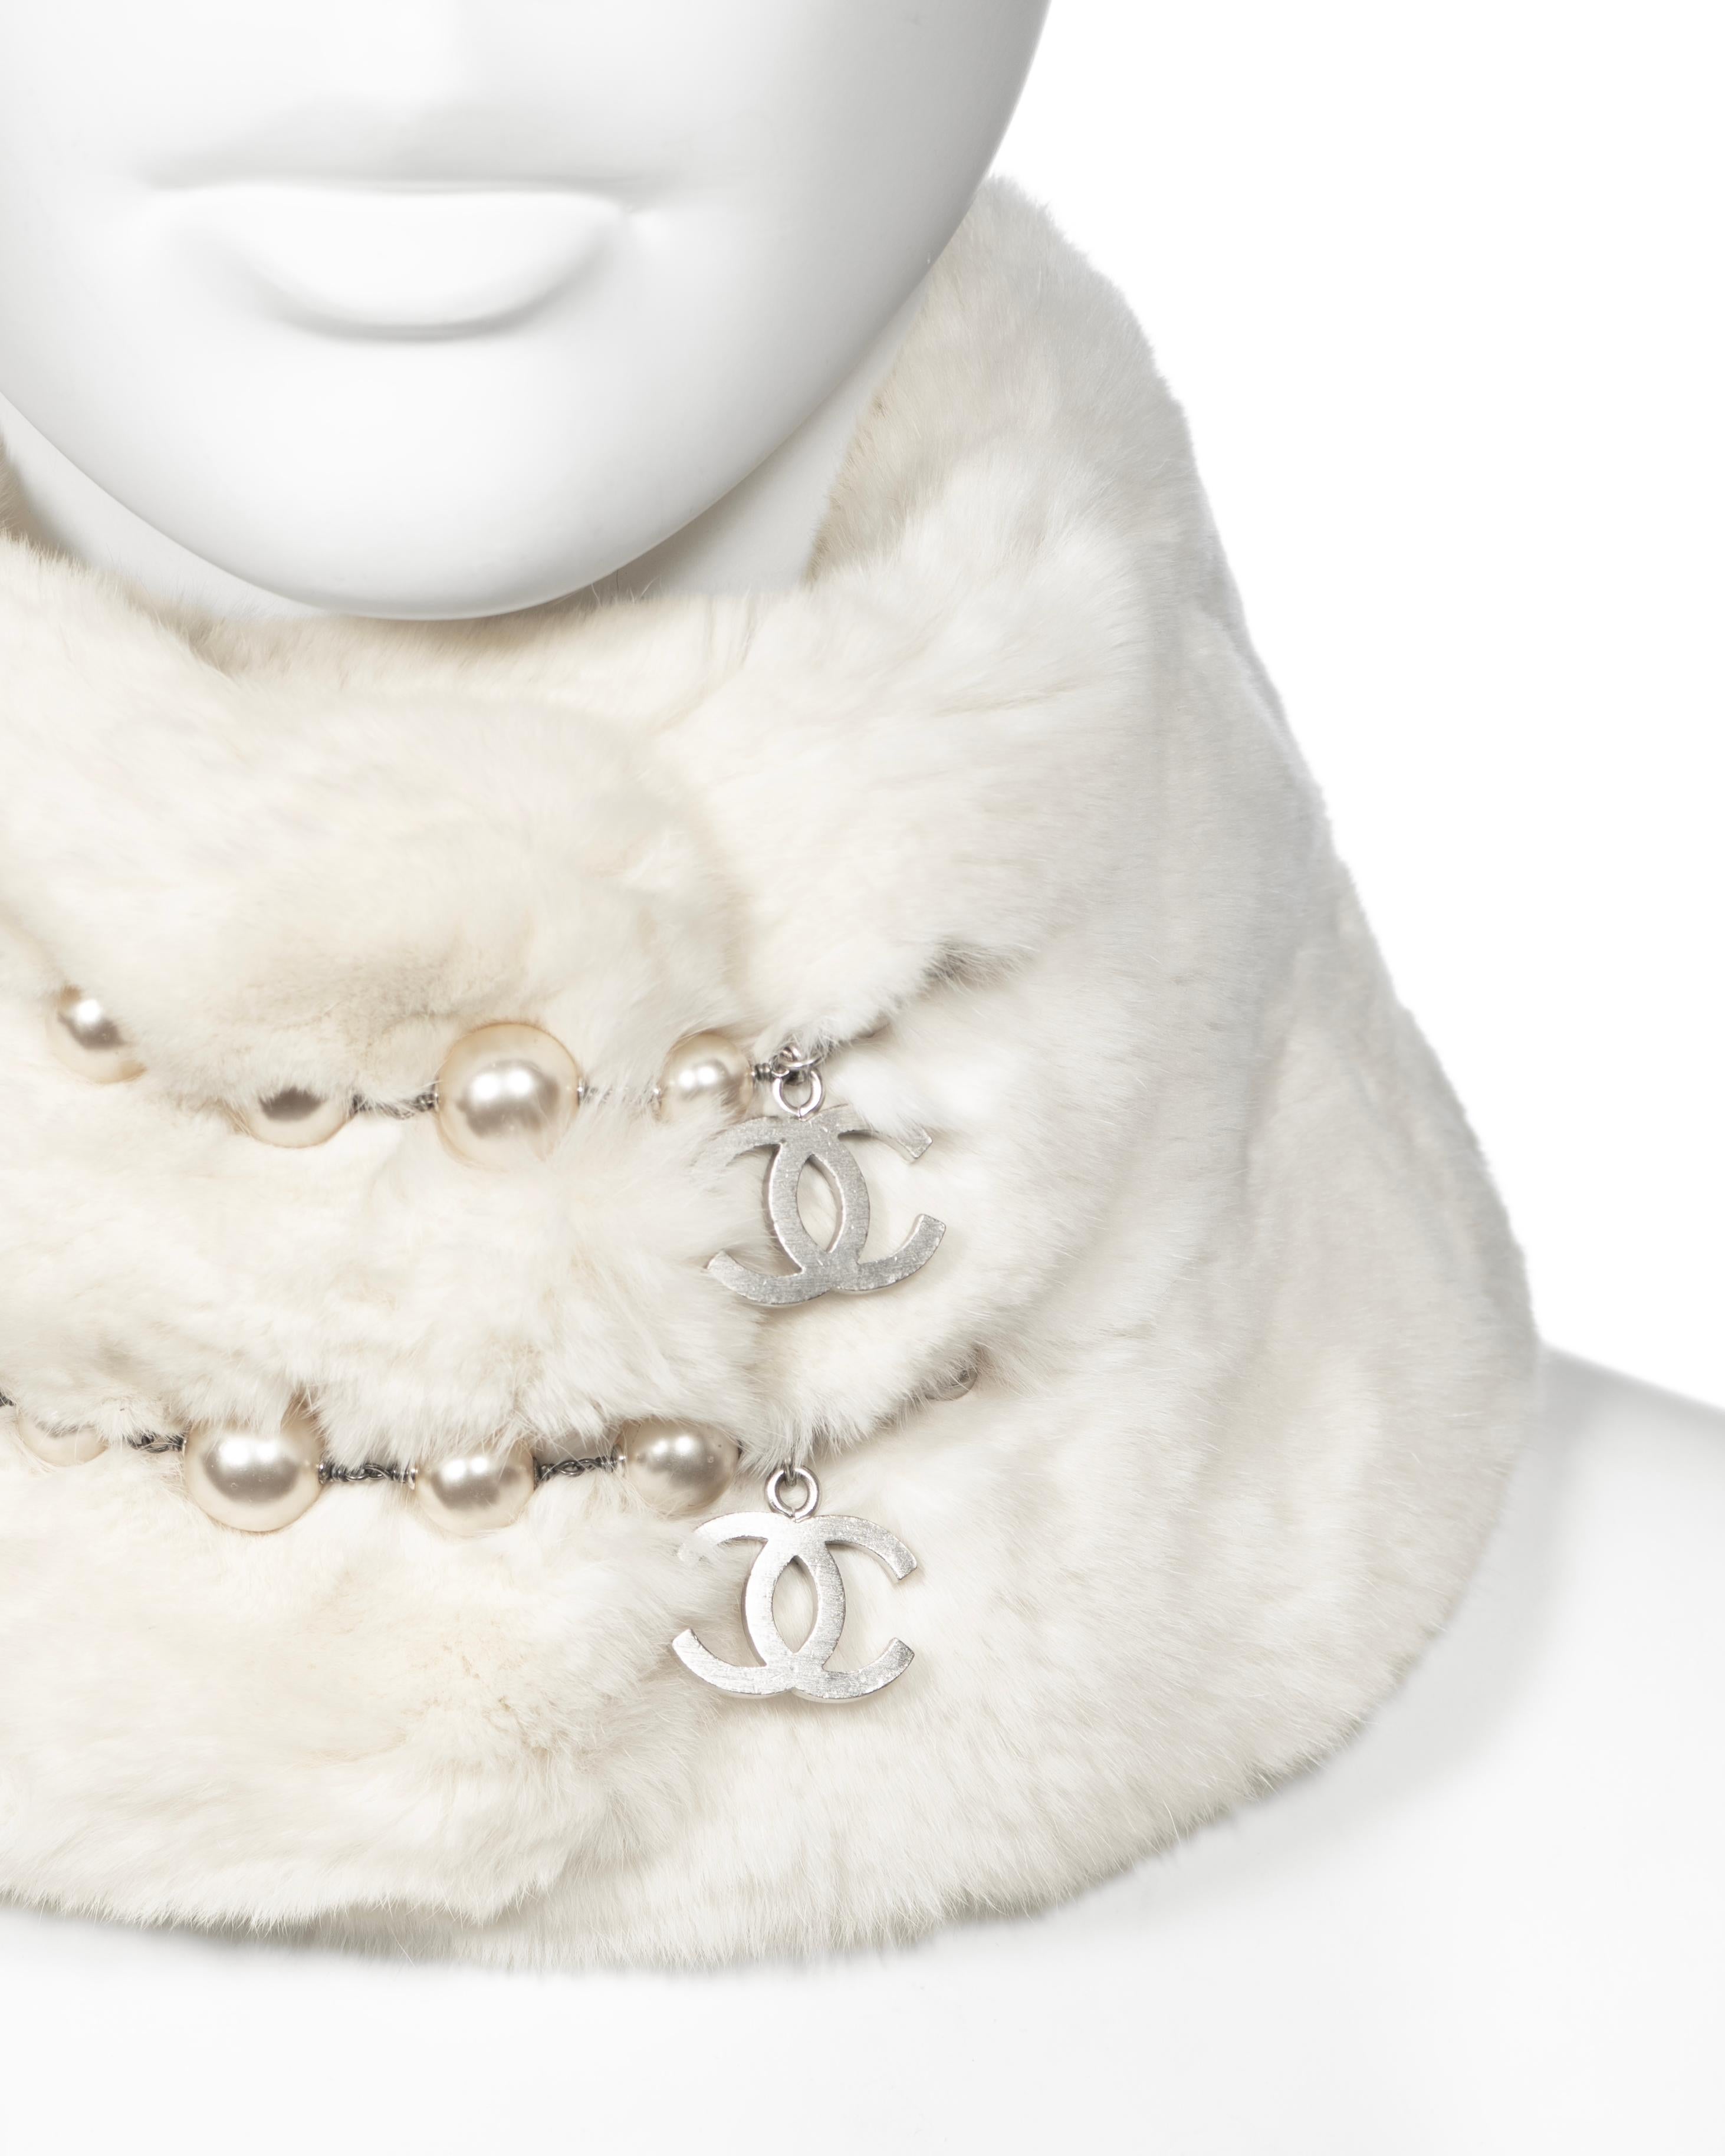 Women's Chanel by Karl Lagerfeld White Rabbit Fur Collar and Cuffs, fw 2003 For Sale